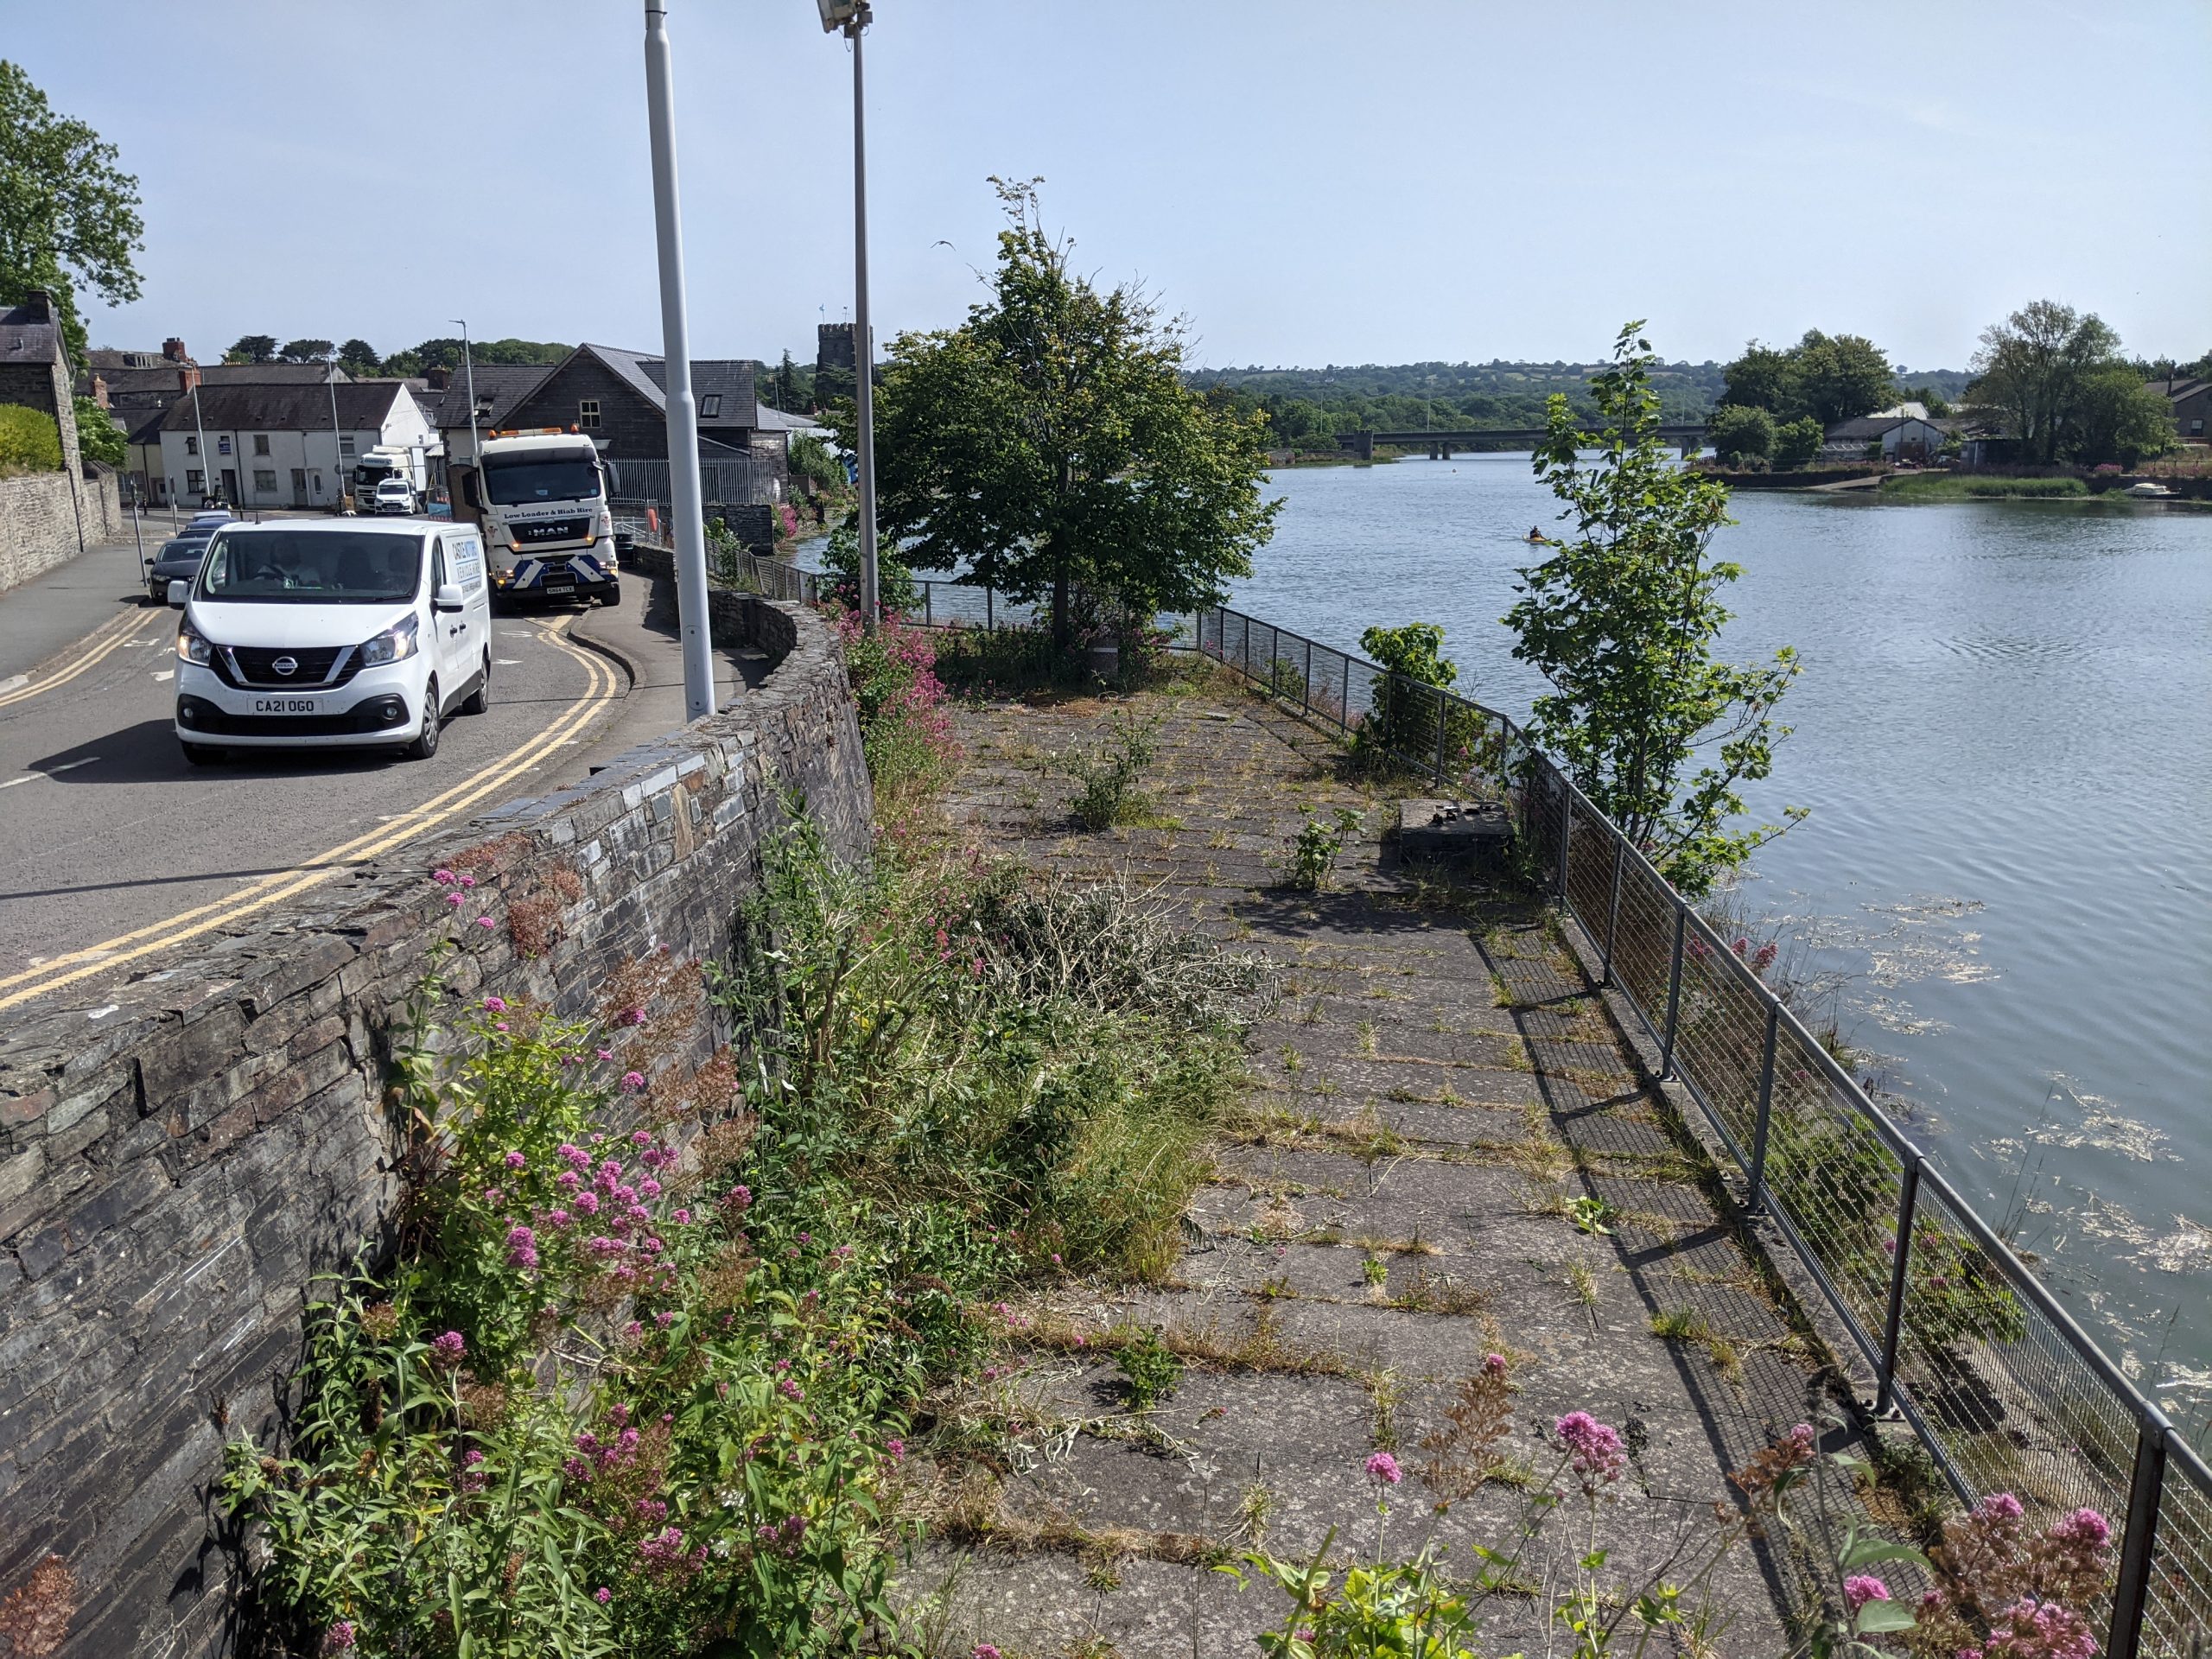 Overgrown public realm between river and road with a van on it.